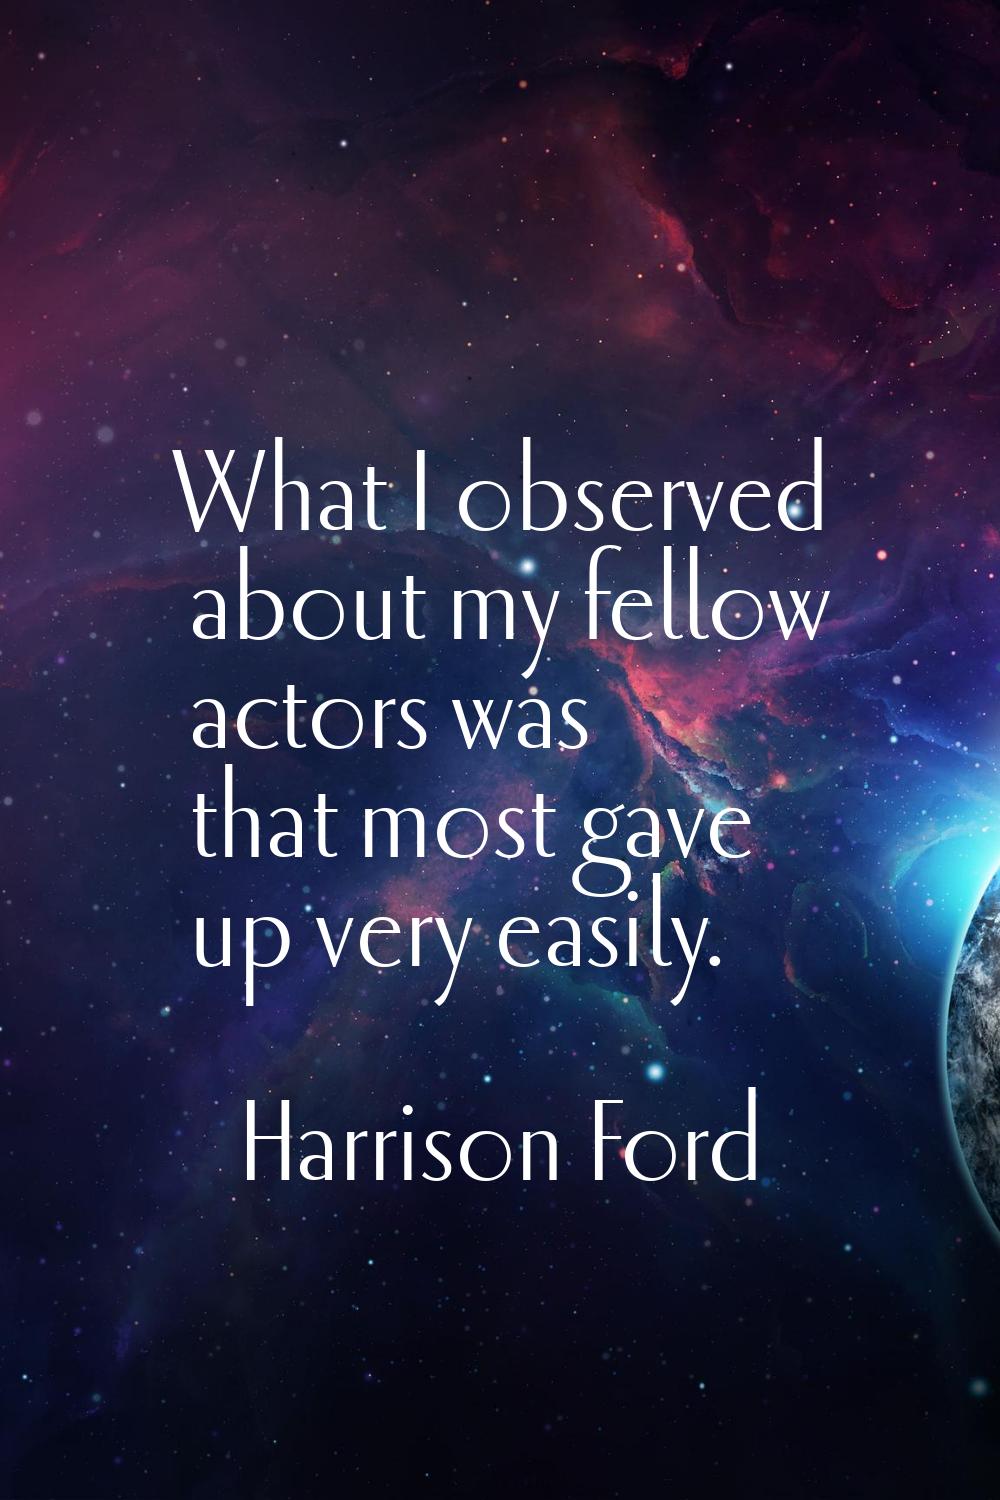 What I observed about my fellow actors was that most gave up very easily.